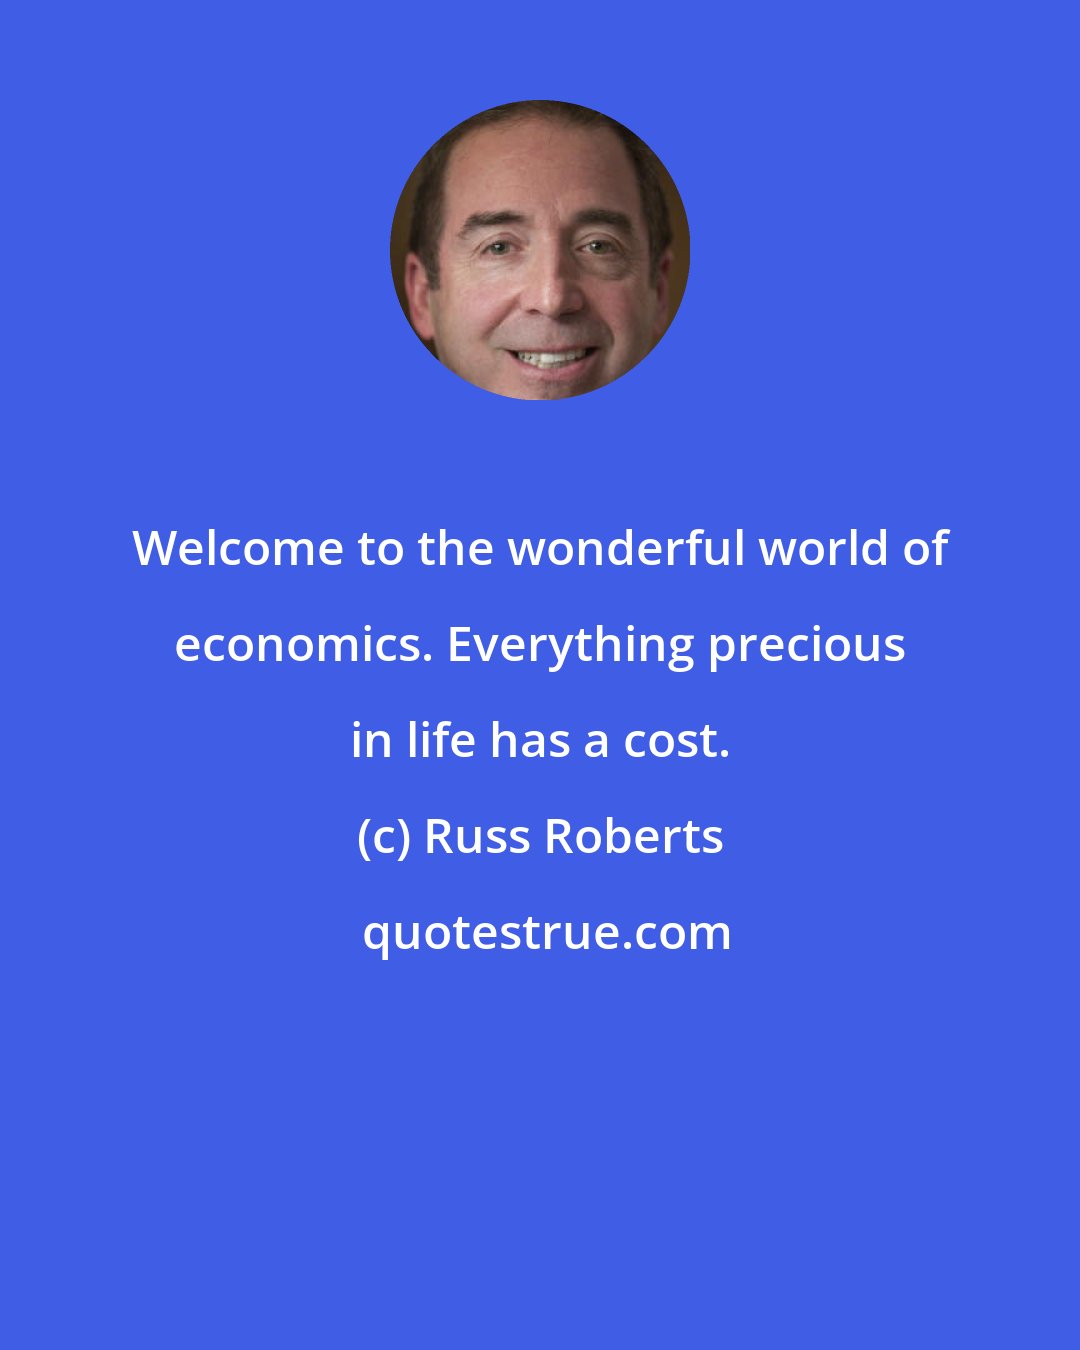 Russ Roberts: Welcome to the wonderful world of economics. Everything precious in life has a cost.